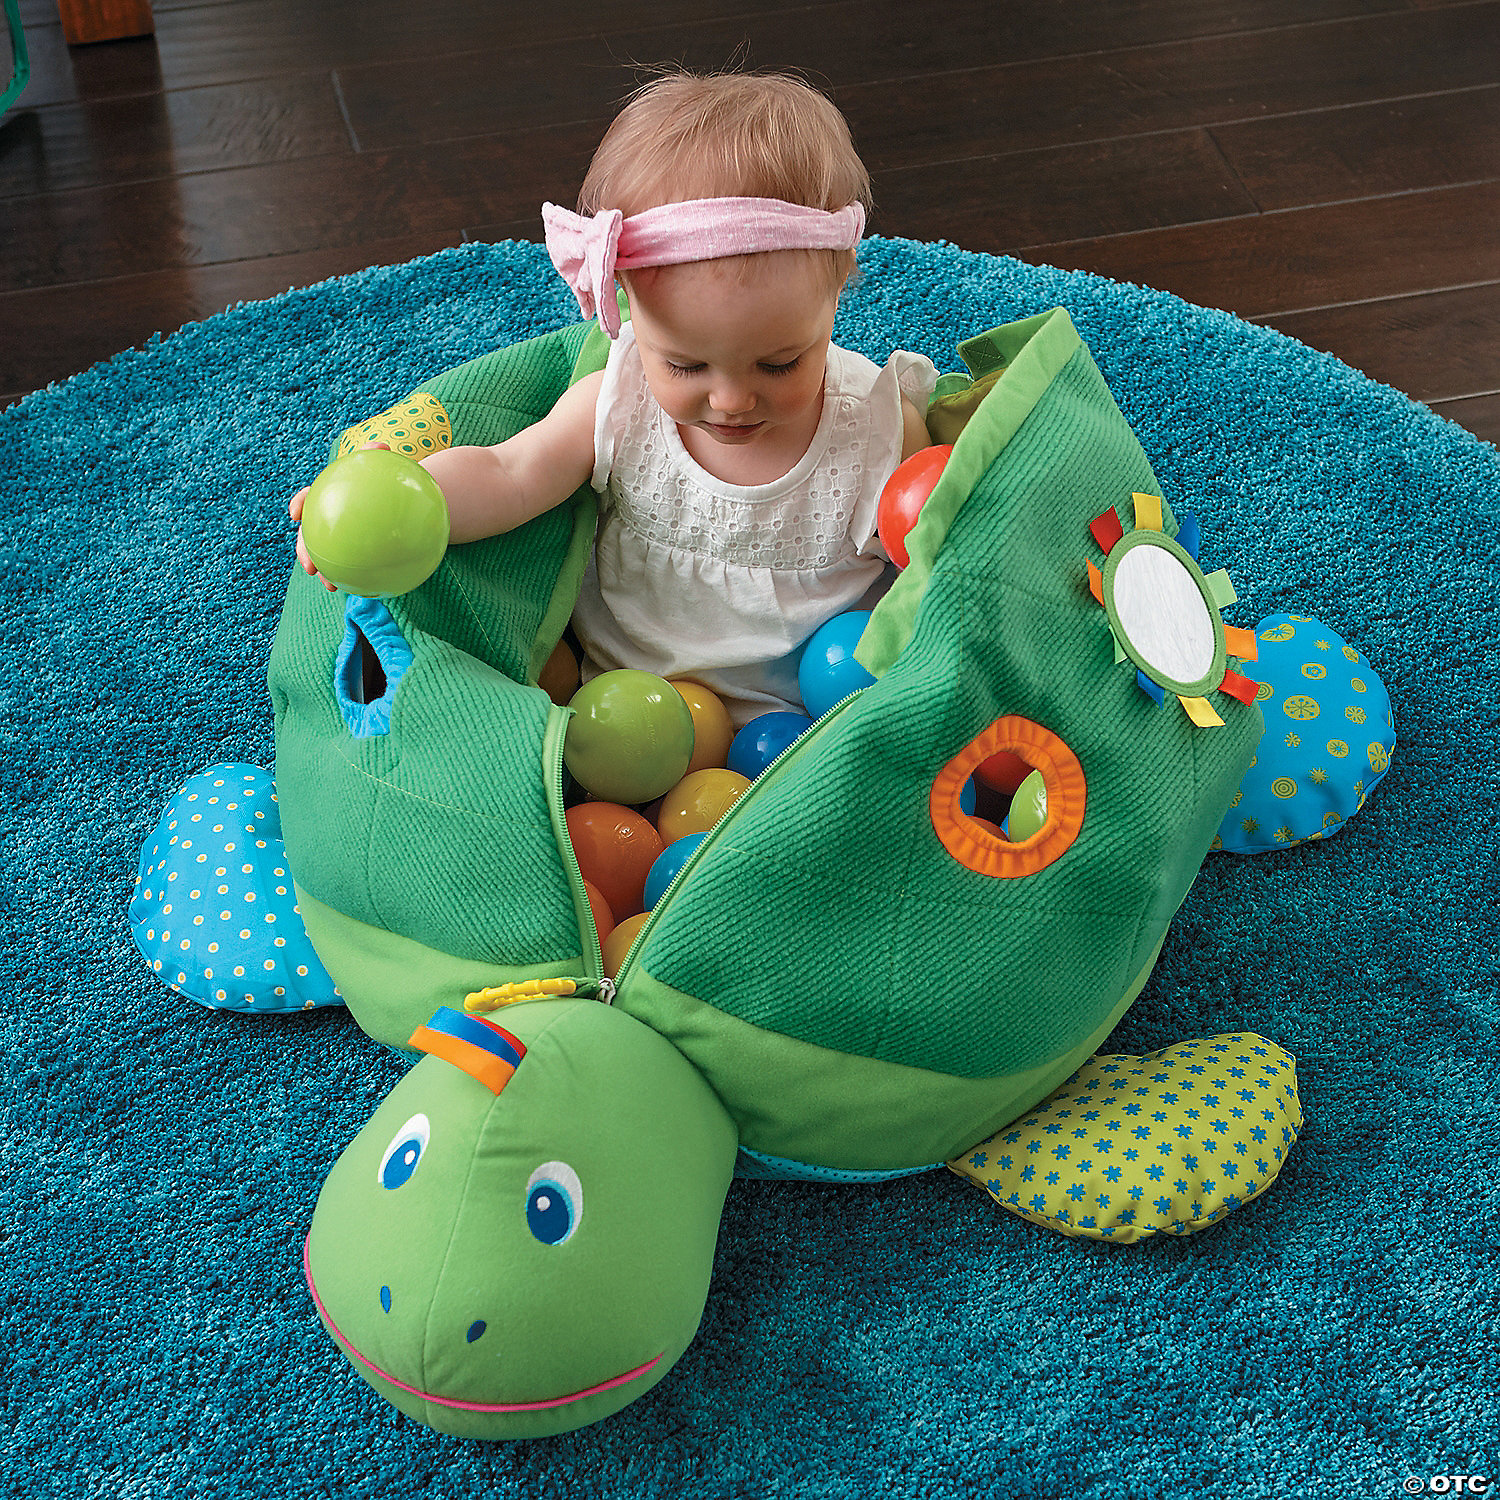 Plush Turtle Ball Pit with 25 Colored Play Balls 